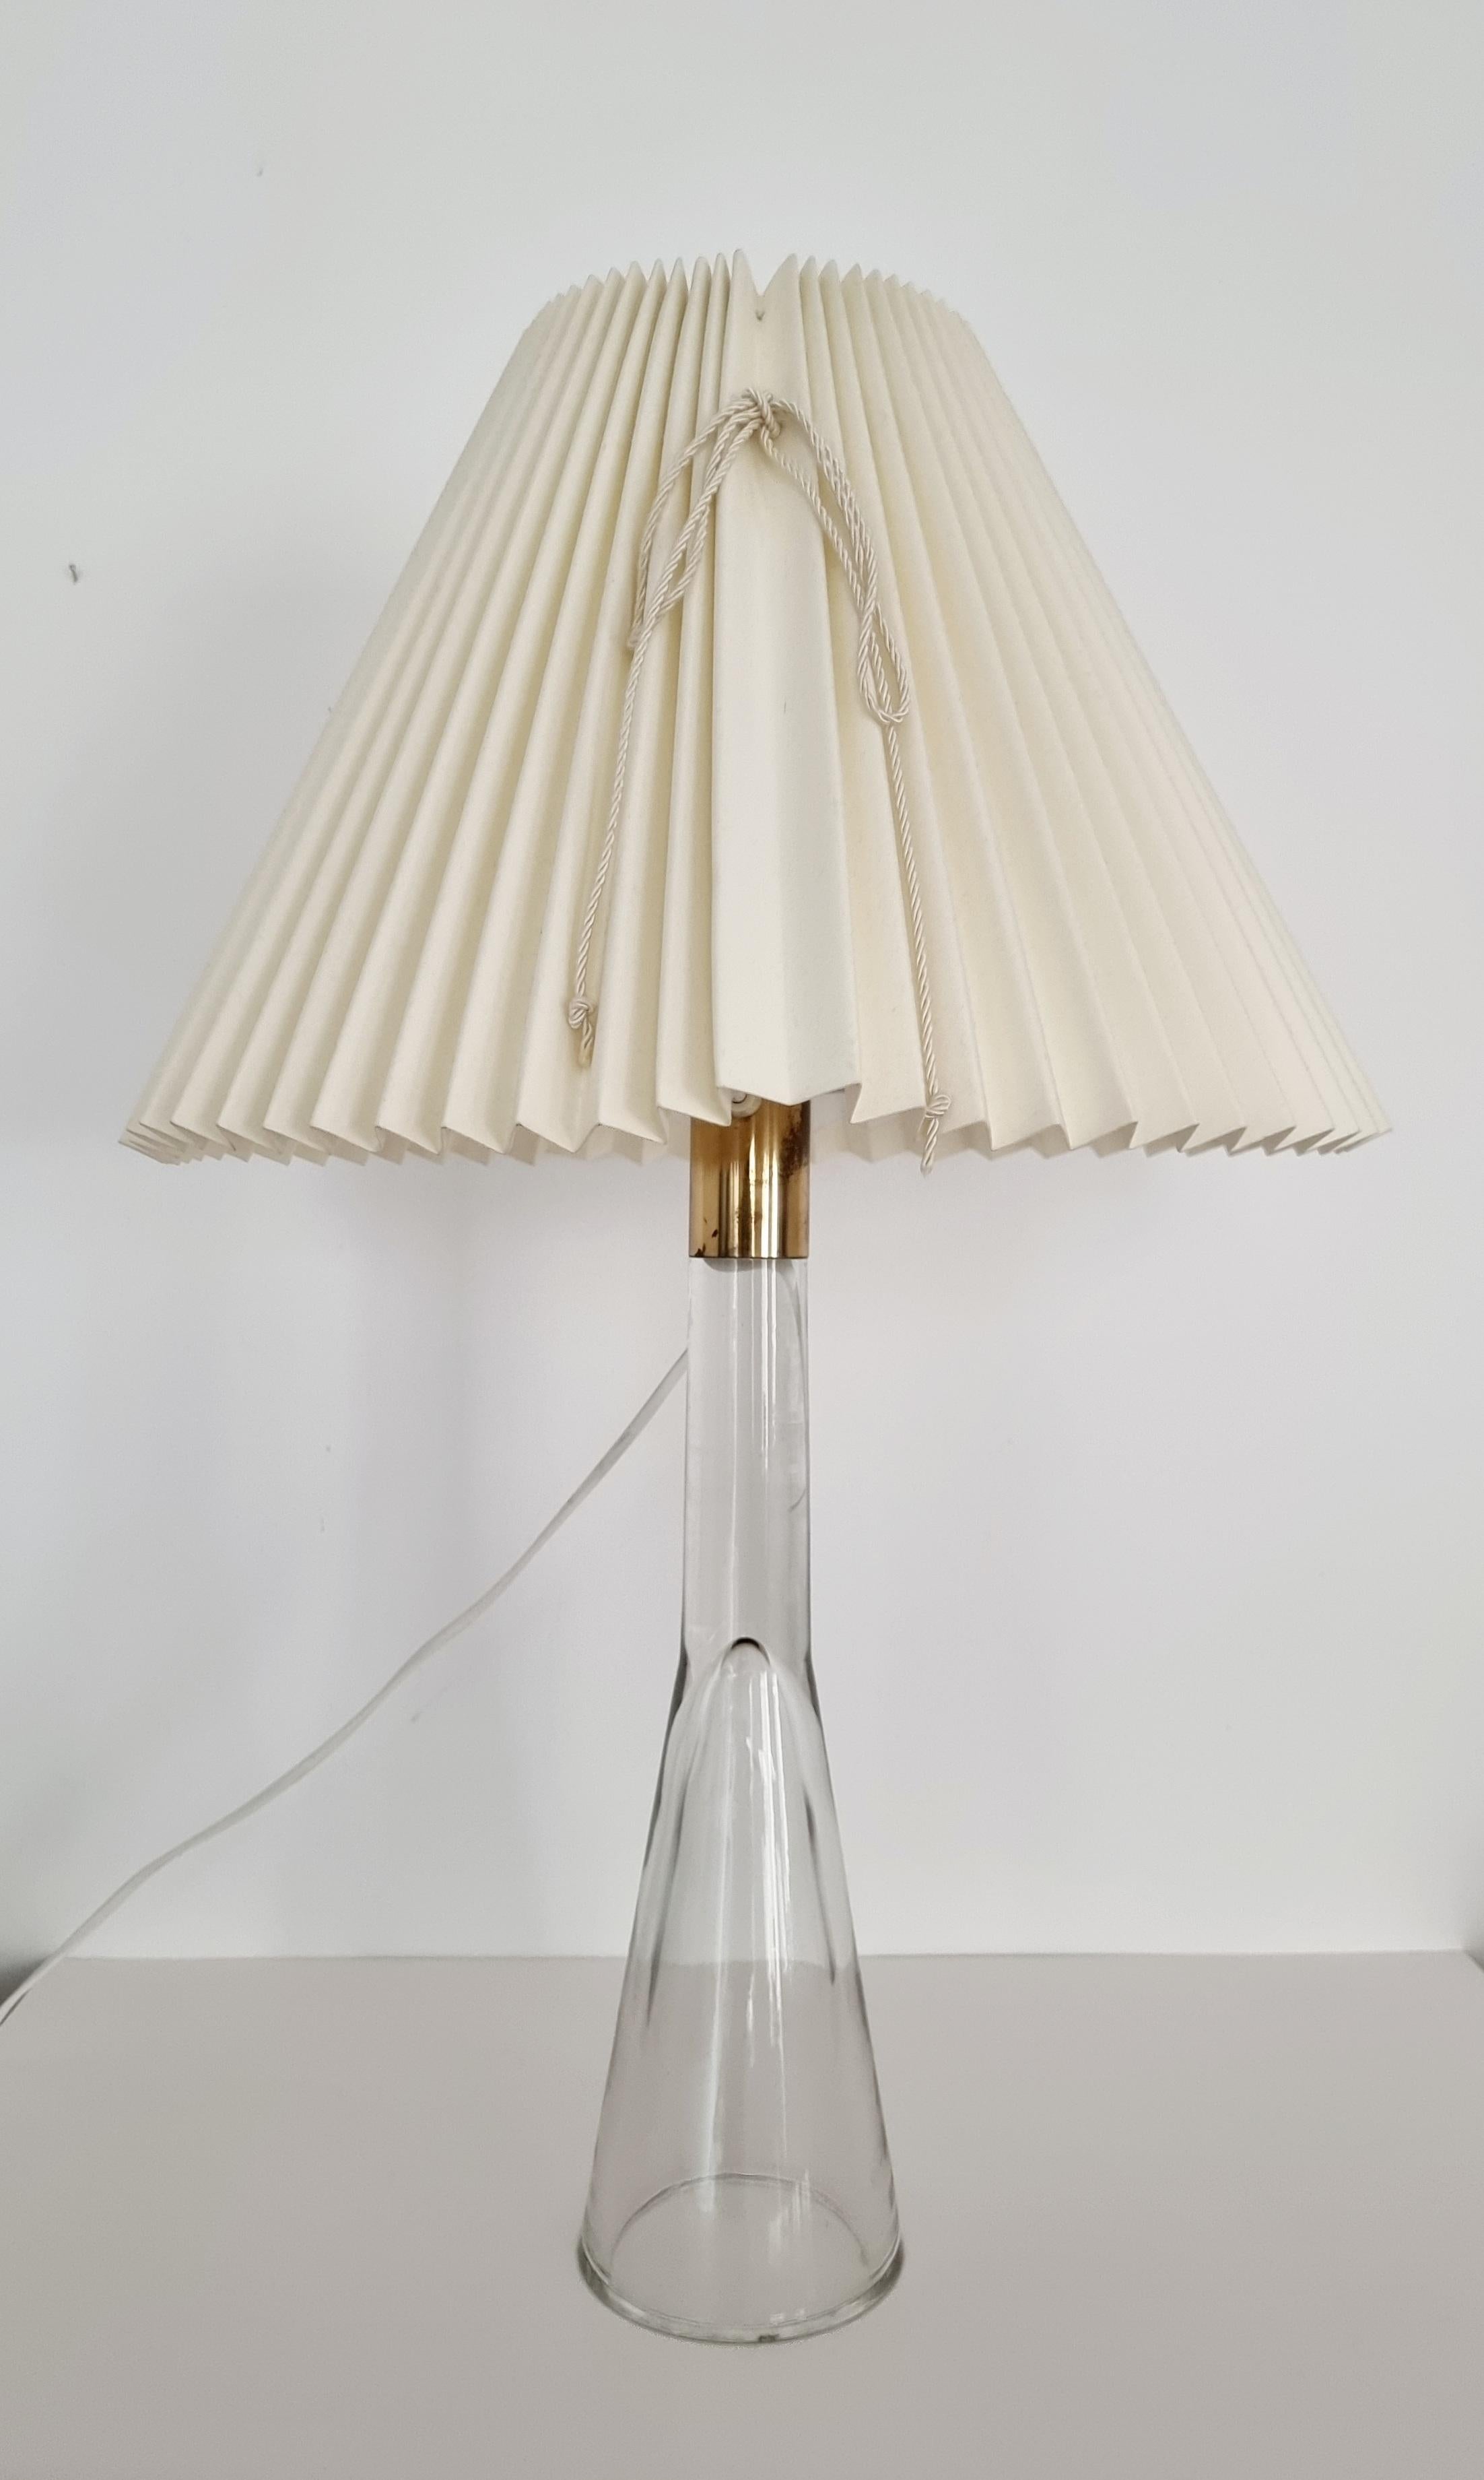 Table lamp in glass designed by Lisa Johansson-Pape for Orno oy. Glass is handmade/free blown att Iittala, Finland. Model Mademoiselle / Lady / 40-013. In beautiful condition. 

This model is designed in 1954, this example is most likely produced